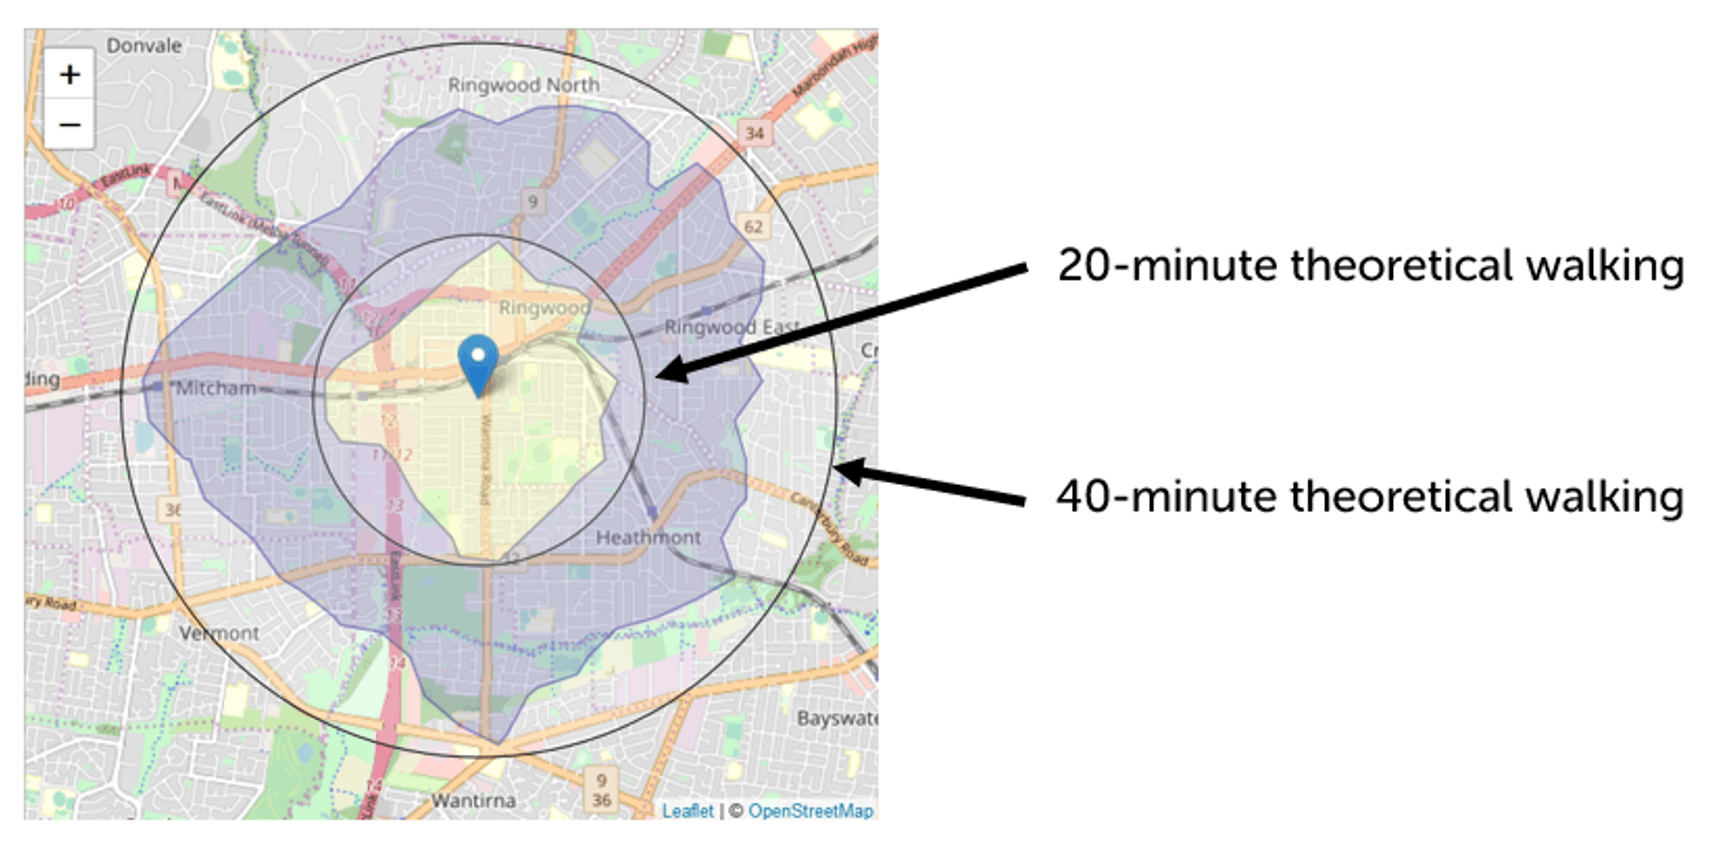 A map showing a location, and 20-minute and 40-minute theoretical walking area around the site